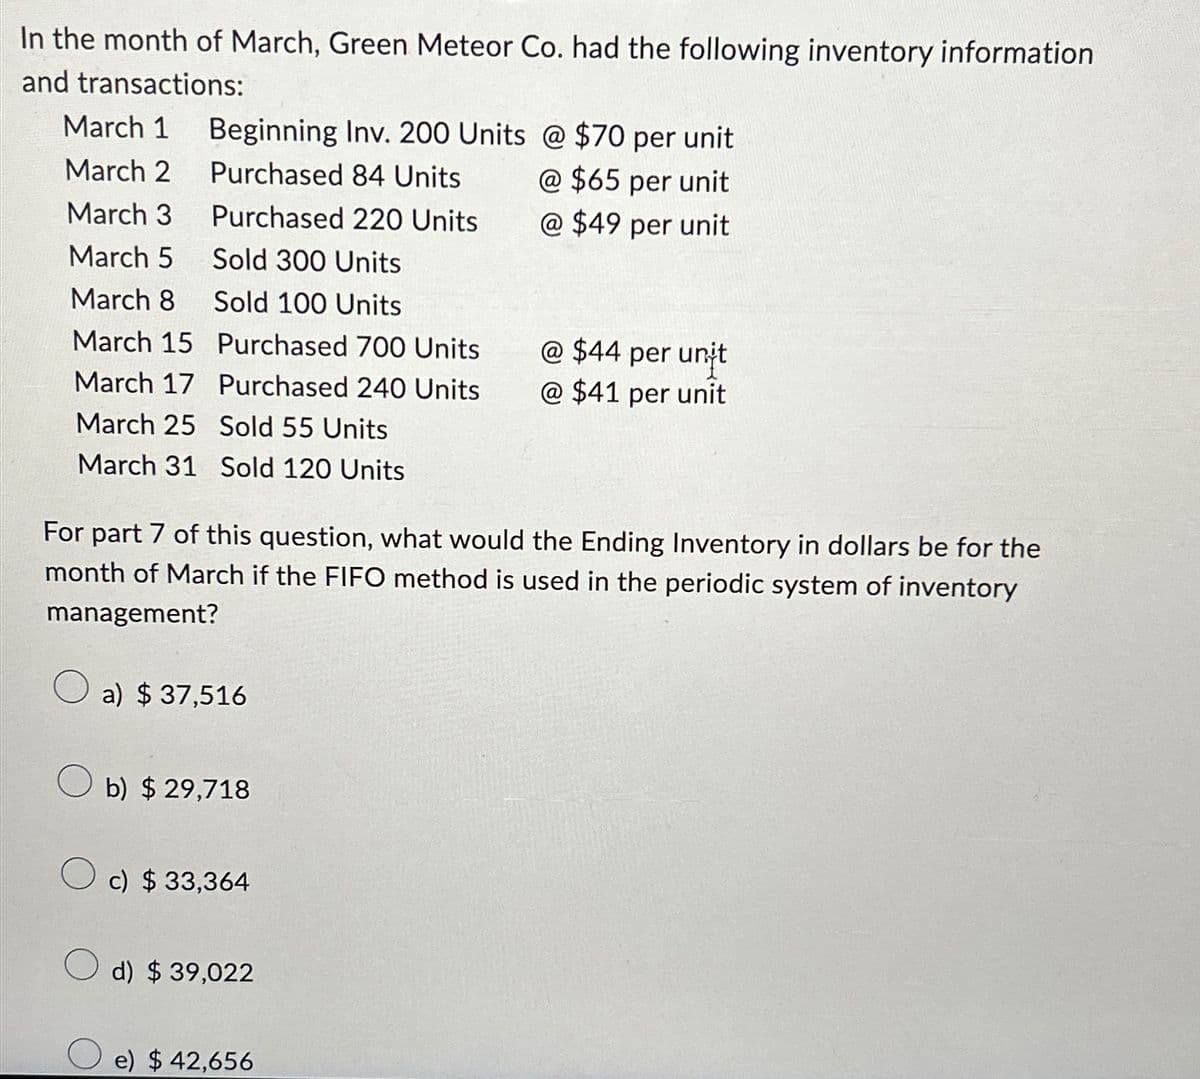 In the month of March, Green Meteor Co. had the following inventory information
and transactions:
March 1 Beginning Inv. 200 Units @ $70 per unit
March 2 Purchased 84 Units
@ $65 per unit
March 3
Purchased 220 Units
@ $49 per unit
March 5 Sold 300 Units
March 8
Sold 100 Units
March 15
Purchased 700 Units
@ $44 per unit
March 17 Purchased 240 Units
@ $41 per unit
March 25 Sold 55 Units
March 31 Sold 120 Units
For part 7 of this question, what would the Ending Inventory in dollars be for the
month of March if the FIFO method is used in the periodic system of inventory
management?
a) $ 37,516
b) $ 29,718
c) $ 33,364
d) $ 39,022
e) $ 42,656